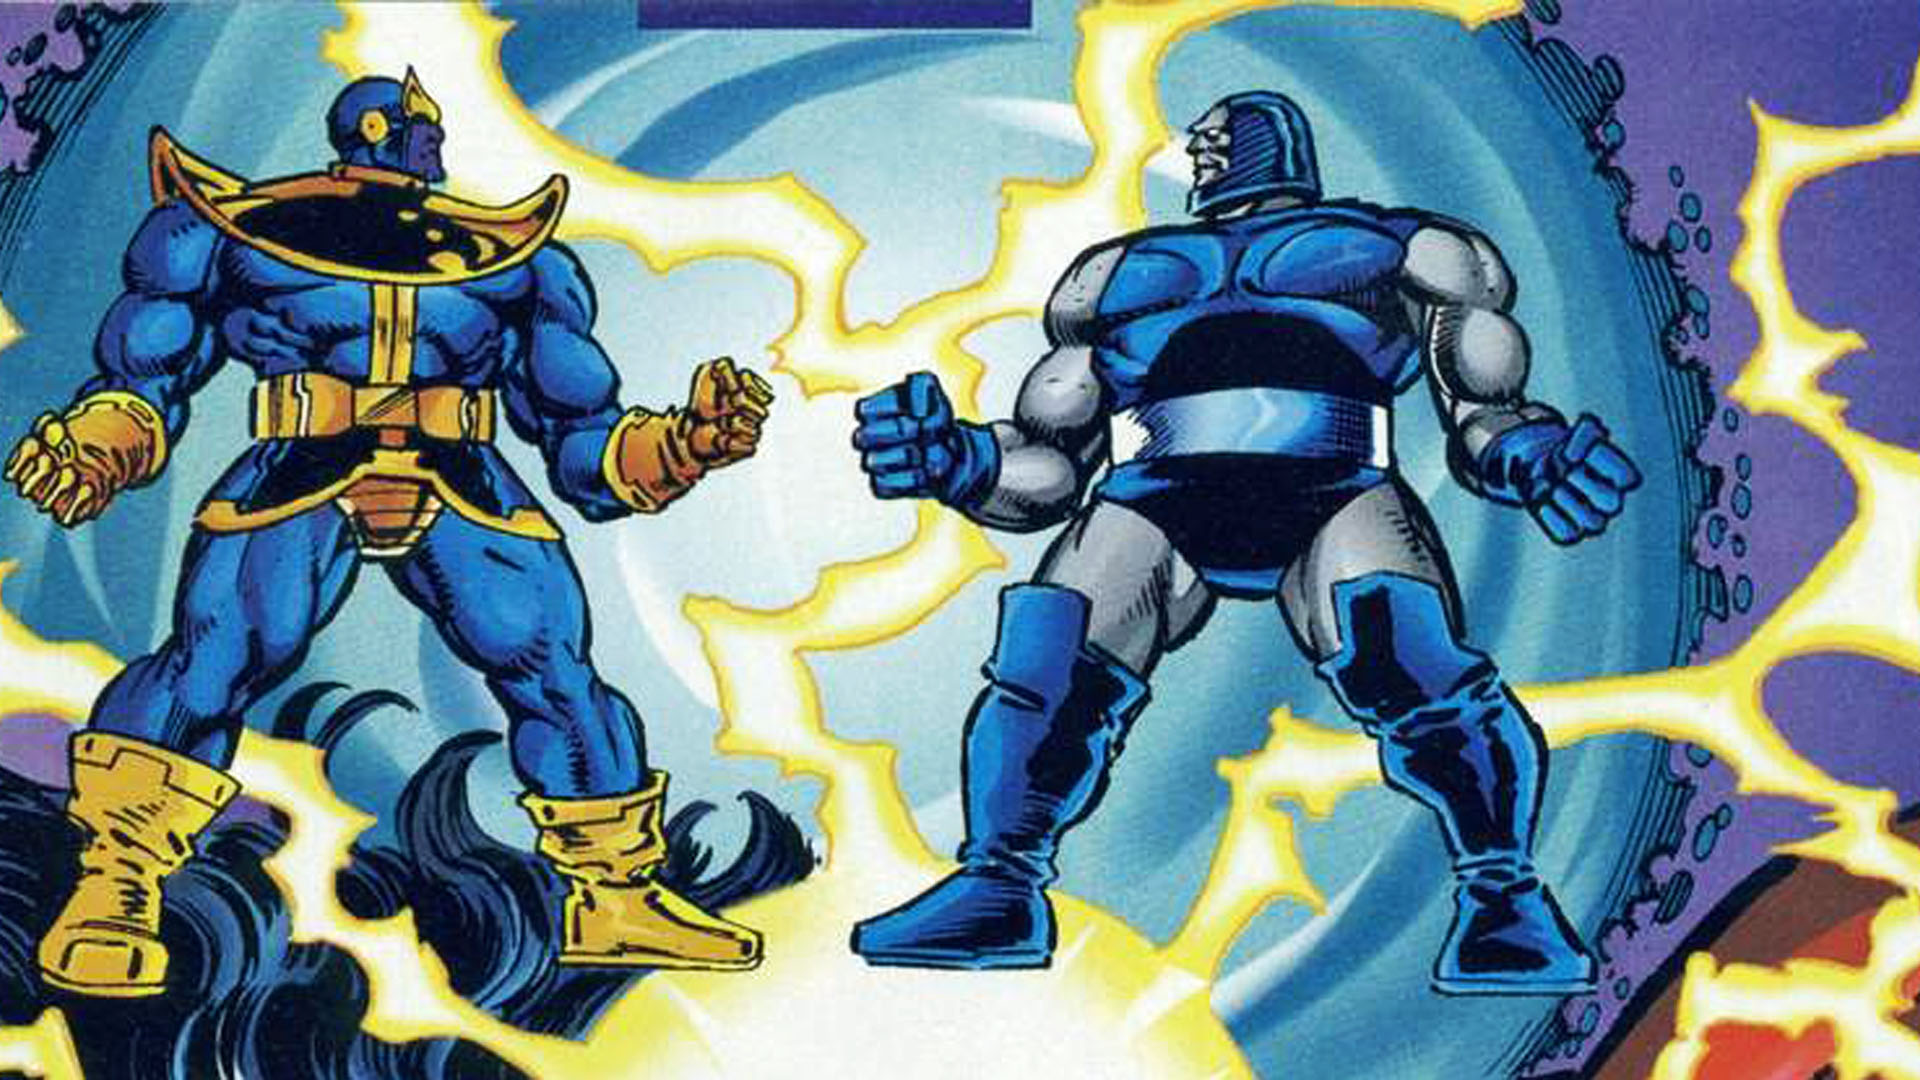 Thanos versus Darkseid the epic Marvel vs. DC matchup that actually happened